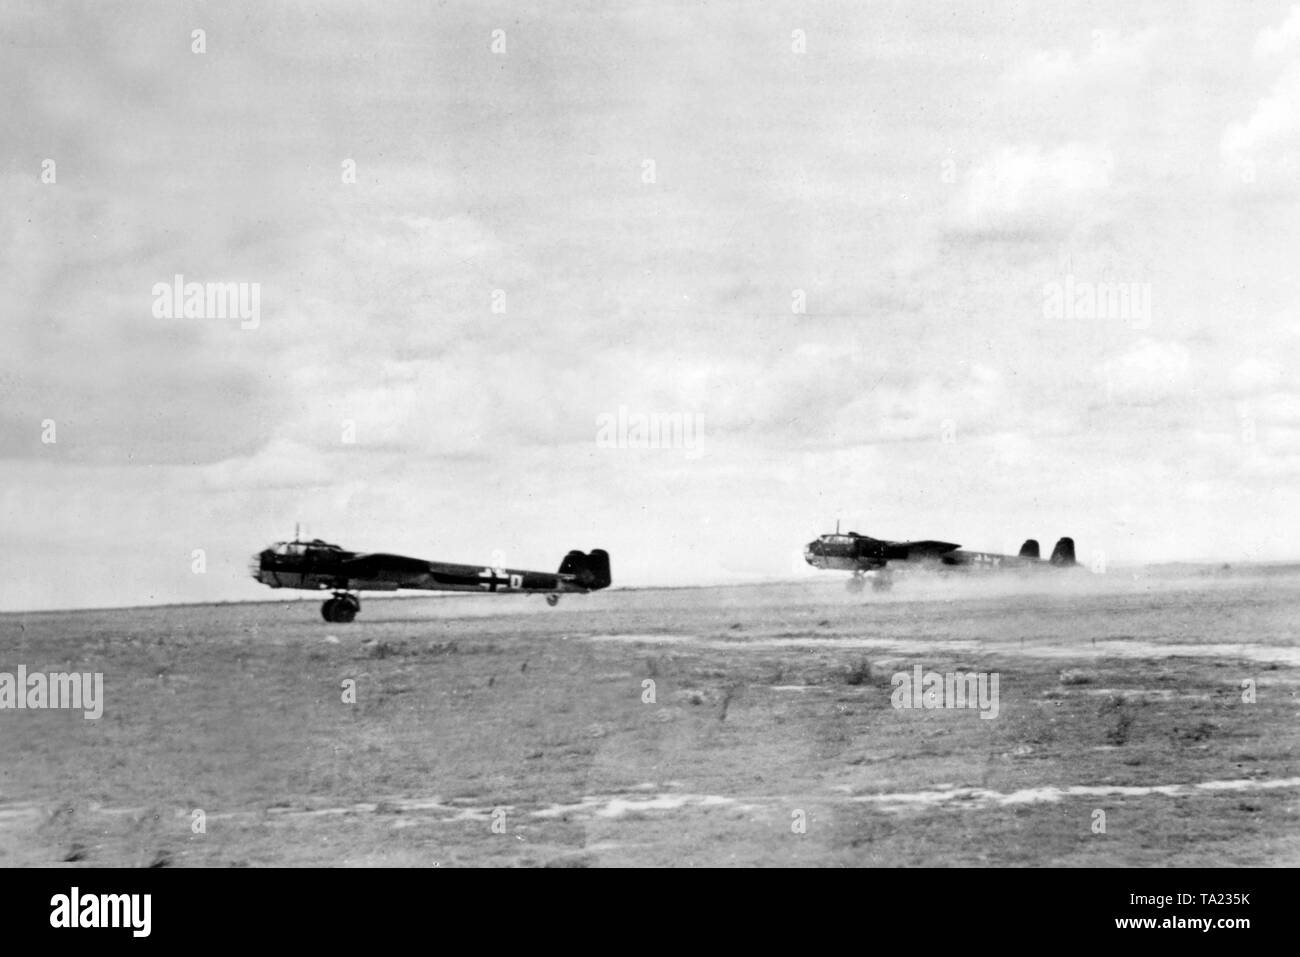 Dornier Do 17 combat aircraft on the way to the takeoff site at an airfield during the fights on the Western Front. Photo: Ketelhohn. Stock Photo